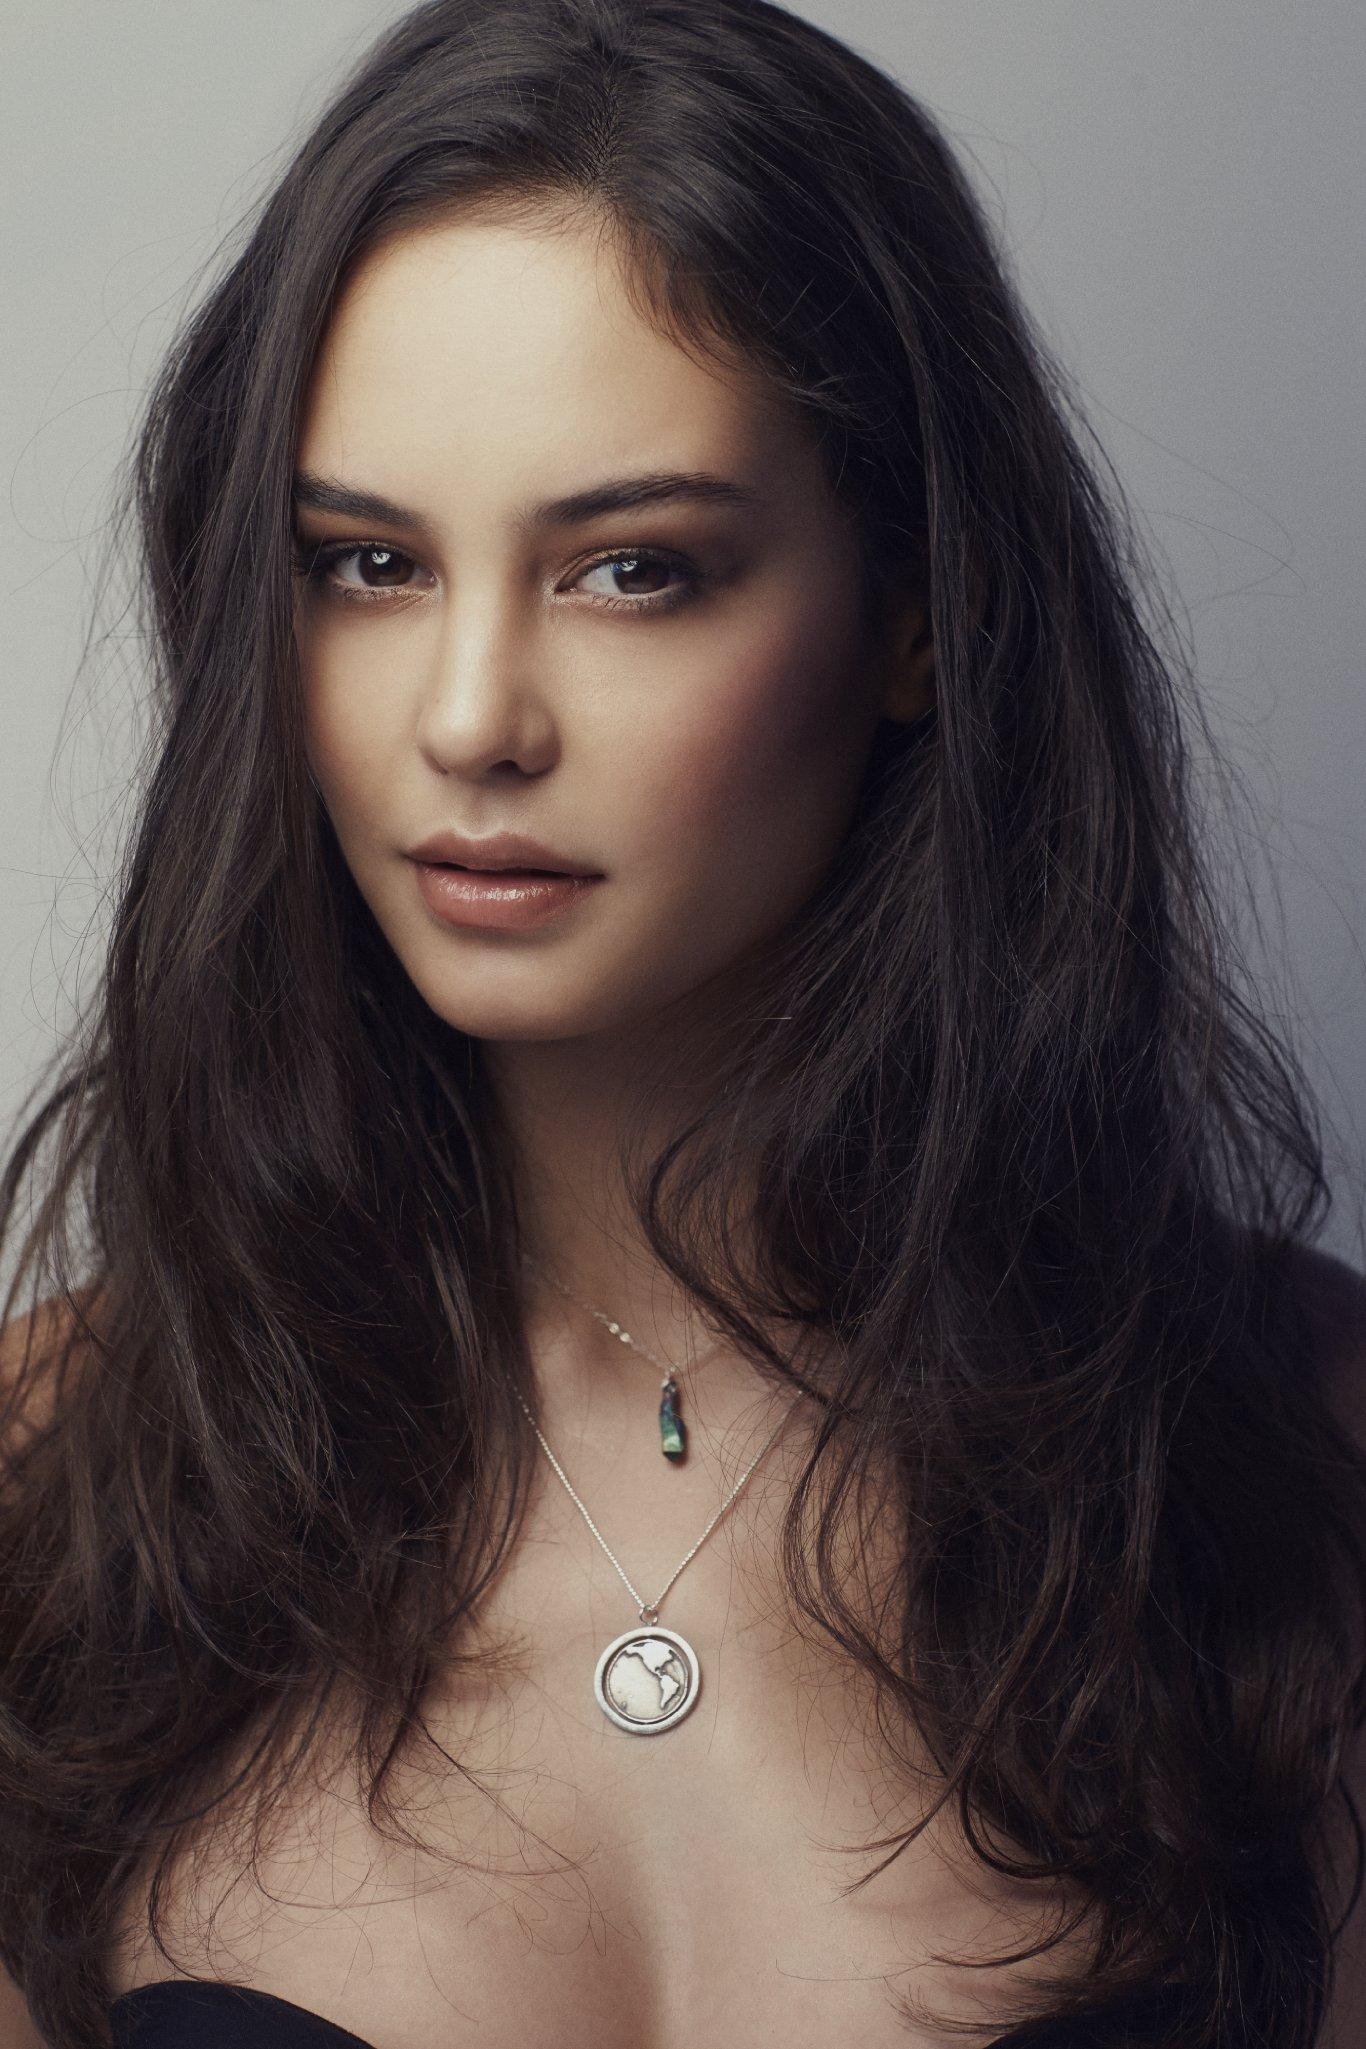 Courtney EATON, Biography and movies